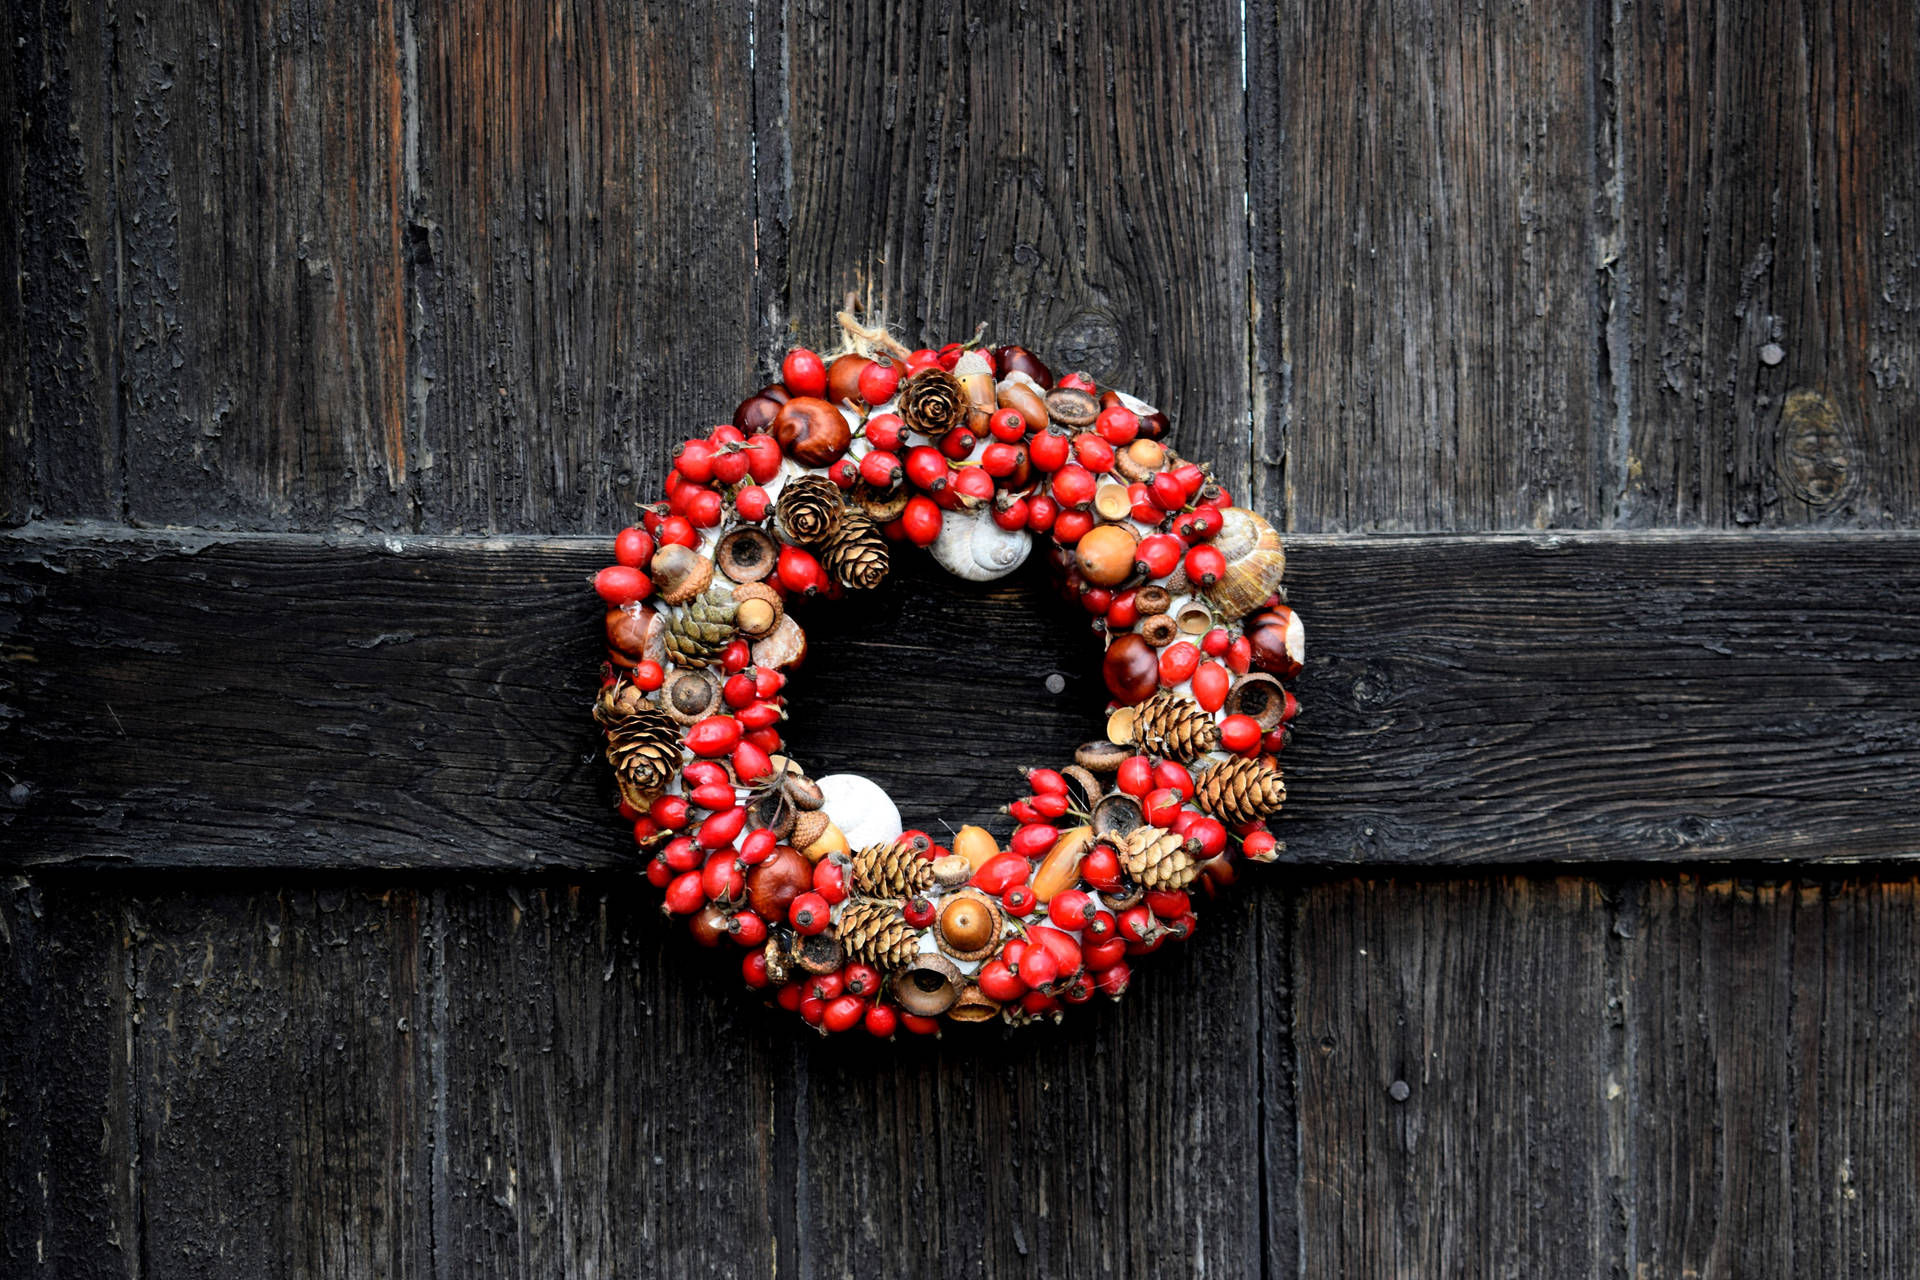 Medieval High Resolution Christmas Wreath Background